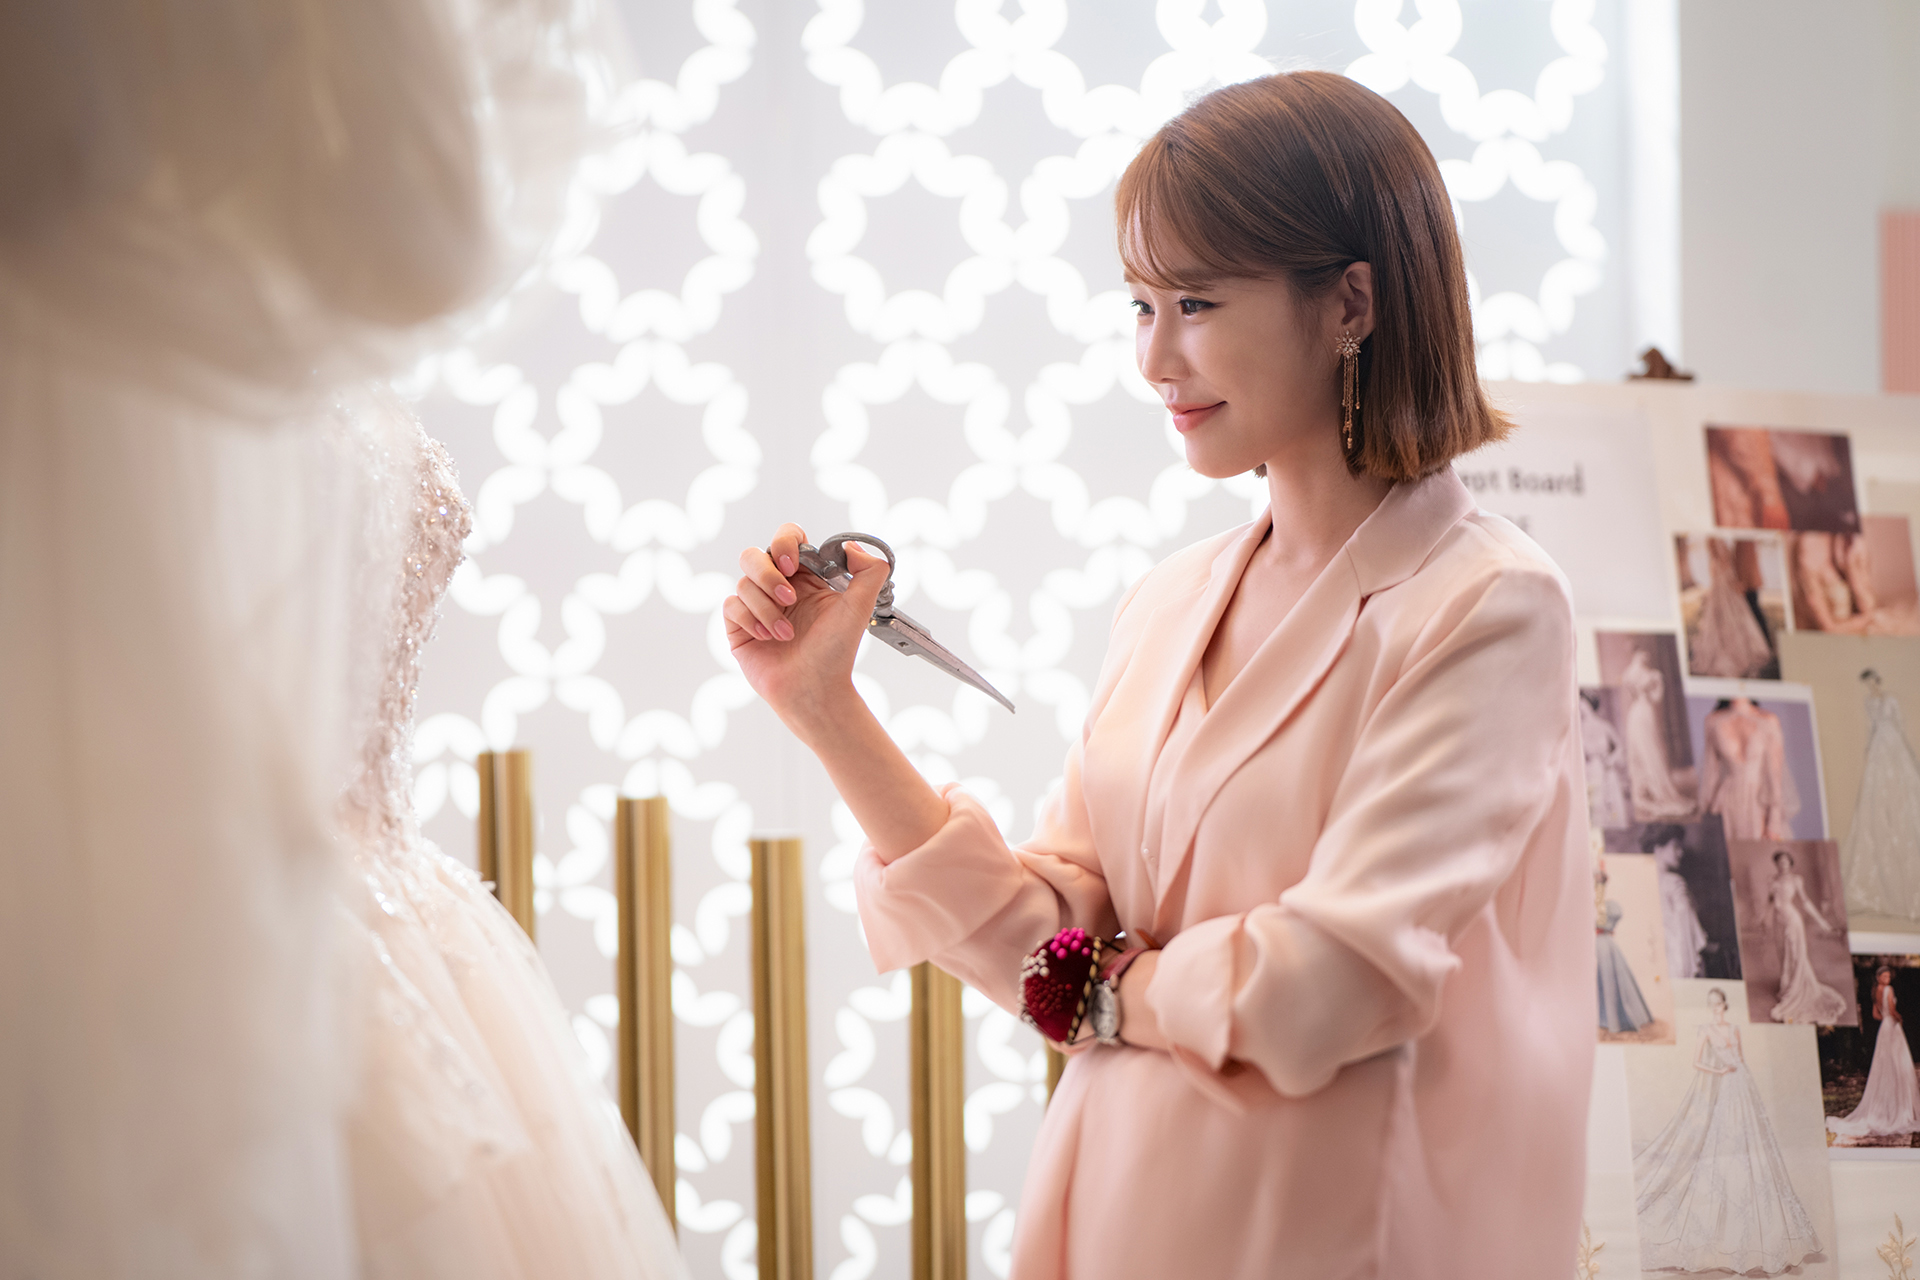 Spy who loved me Yoo In-na predicts unpredictable transformation.The MBC new tree mini series Spy (directed Lee Jai-jin, playwright Lee Jai-jin, production and picture) which will be broadcast on October 21st (Wednesday), turns out that Spy is the constitution (?), Wedding Dress Desiigner, Gang Beauty, released the character still cut of Yoo In-na.The reversal of Kang-ae, who thought sewing was a vocation, stimulates curiosity.Spy, who loved me, draws a thrilling secret romantic comedy of two secret Husbands and a woman caught up in spy warfare.The wonderful intelligence of three men and women who can never be together gives a pleasant smile and a thrilling excitement.Director Lee Jai-jin, who showed sensual production through The Banker and My Daughters Golden Month, will hold the megaphone and the script will be directed by Lee Jai-jin.In particular, attention is focused on Lee Jai-jins first drama, which produced big hits such as The Directors of Namsan, Astronomy: Asking the Sky, and Miljeong. The production was directed by Written and Picture.The meeting between the Loco artisan Moon Jung-hyuk and Yoo In-na is a hot topic in itself, and the Lim Ju-hwan, which is uniquely attractive, is also added to the expectation.The synergy of the three actors who predicted the romantic spy war of the world through the posters and teaser videos released earlier is more than ever.Above all, the transformation of the acting of Born to Be Lovely Yoo In-na stimulates the expectation psychology.Yoo In-na plays Wedding Dress Desiigner, Gang Beauty, who is married to two men with secret police and industry secrets.Wedding Dress is a person who is passionate about making a vocation and is more passionate than anyone else.However, he finds an unexpected aptitude by being caught up in a wonderful spy war with two men, former Husband Jeon Ji-hoon (Moon Jung-hyuk), former industrial spy Lim Ju-hwan.It shows the latent agility and sharp touch, and the hard carry activity that holds up the two men.Meanwhile, the figure of Yoo In-na, which properly fits the cool charm in the public photos, catches the eye.The pride is conveyed in the glittering eyes and happy smile of the river that completes the Wedding Dress with delicate touch.As a representative of the luxury Wedding Dress shop for the top 1% customers, there is an elegance in behavior and expression.He is a strong, charming man who gives off his charisma with a relaxed smile at the shooting range. His lovely and imposing figure raises expectations.Yoo In-na said, I Husband and the present Husband, and me.The story of the three people who could not mix like water and oil was exciting, he said. The biggest attraction of Kang is honesty.I think that many people can sympathize with the honest and authentic ambassadors at every moment. We have been practicing sewing with the foundation to express the beauty of the Wedding Dress Desiigner.Spy is also working hard on shooting and action exercises to dissipate the anti-war charm of the constitution, he said.Meanwhile, the MBC new tree mini series Spy, which loved me, will be broadcast for the first time at 9:20 pm on October 21st.iMBC Kim Hye-young  Photos